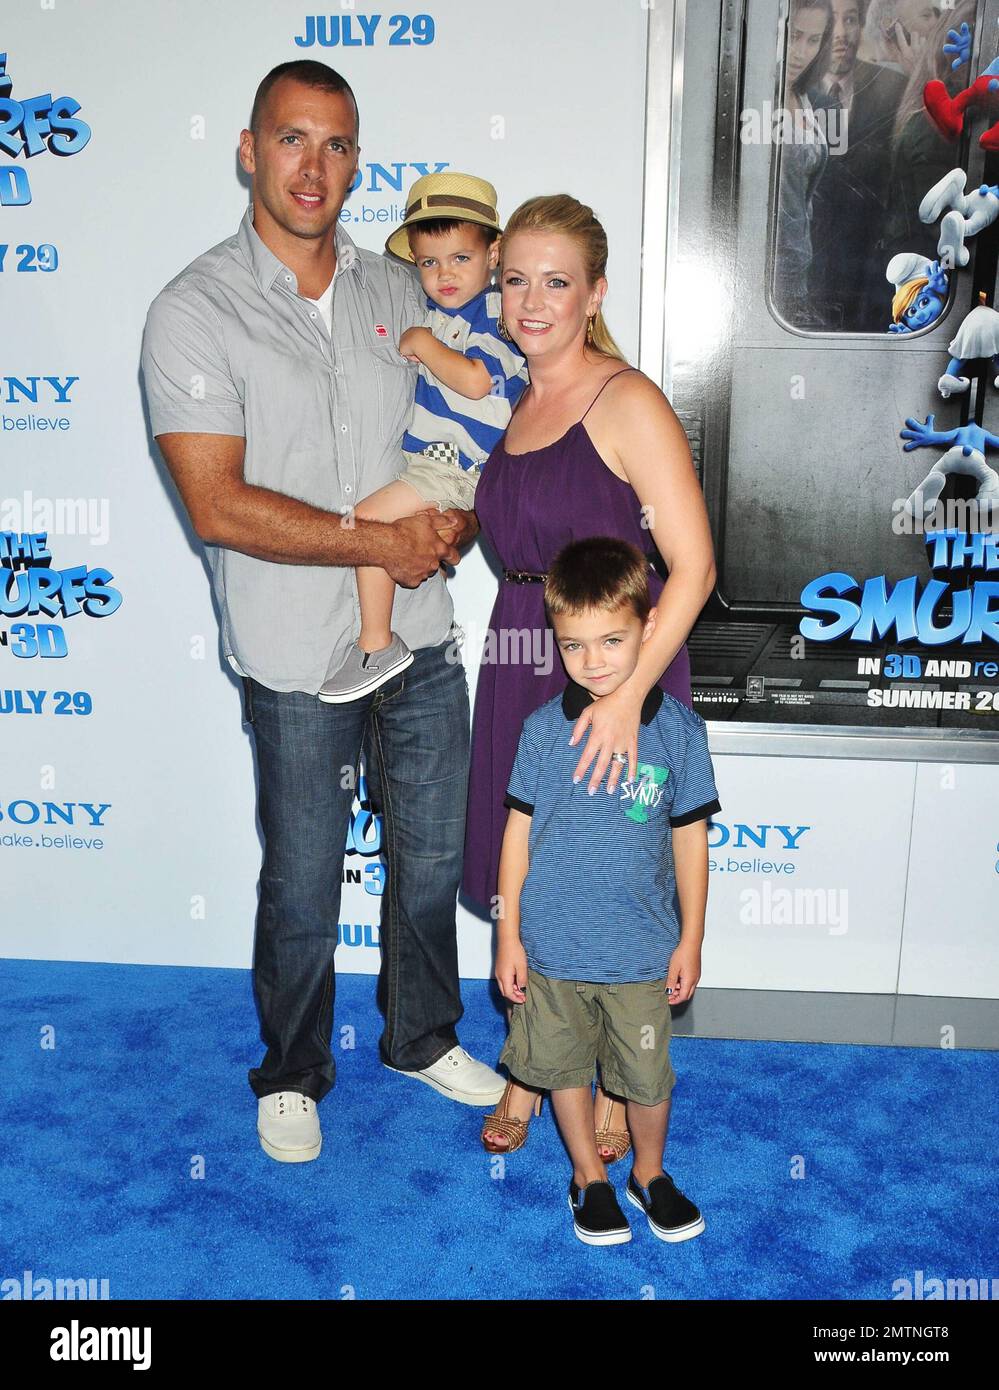 Melissa Joan Hart and family at the Word Premiere of Columbia Pictures' 'Smurfs' at the Ziegfeld Theater.  New York, NY 7/24/2011   . Stock Photo